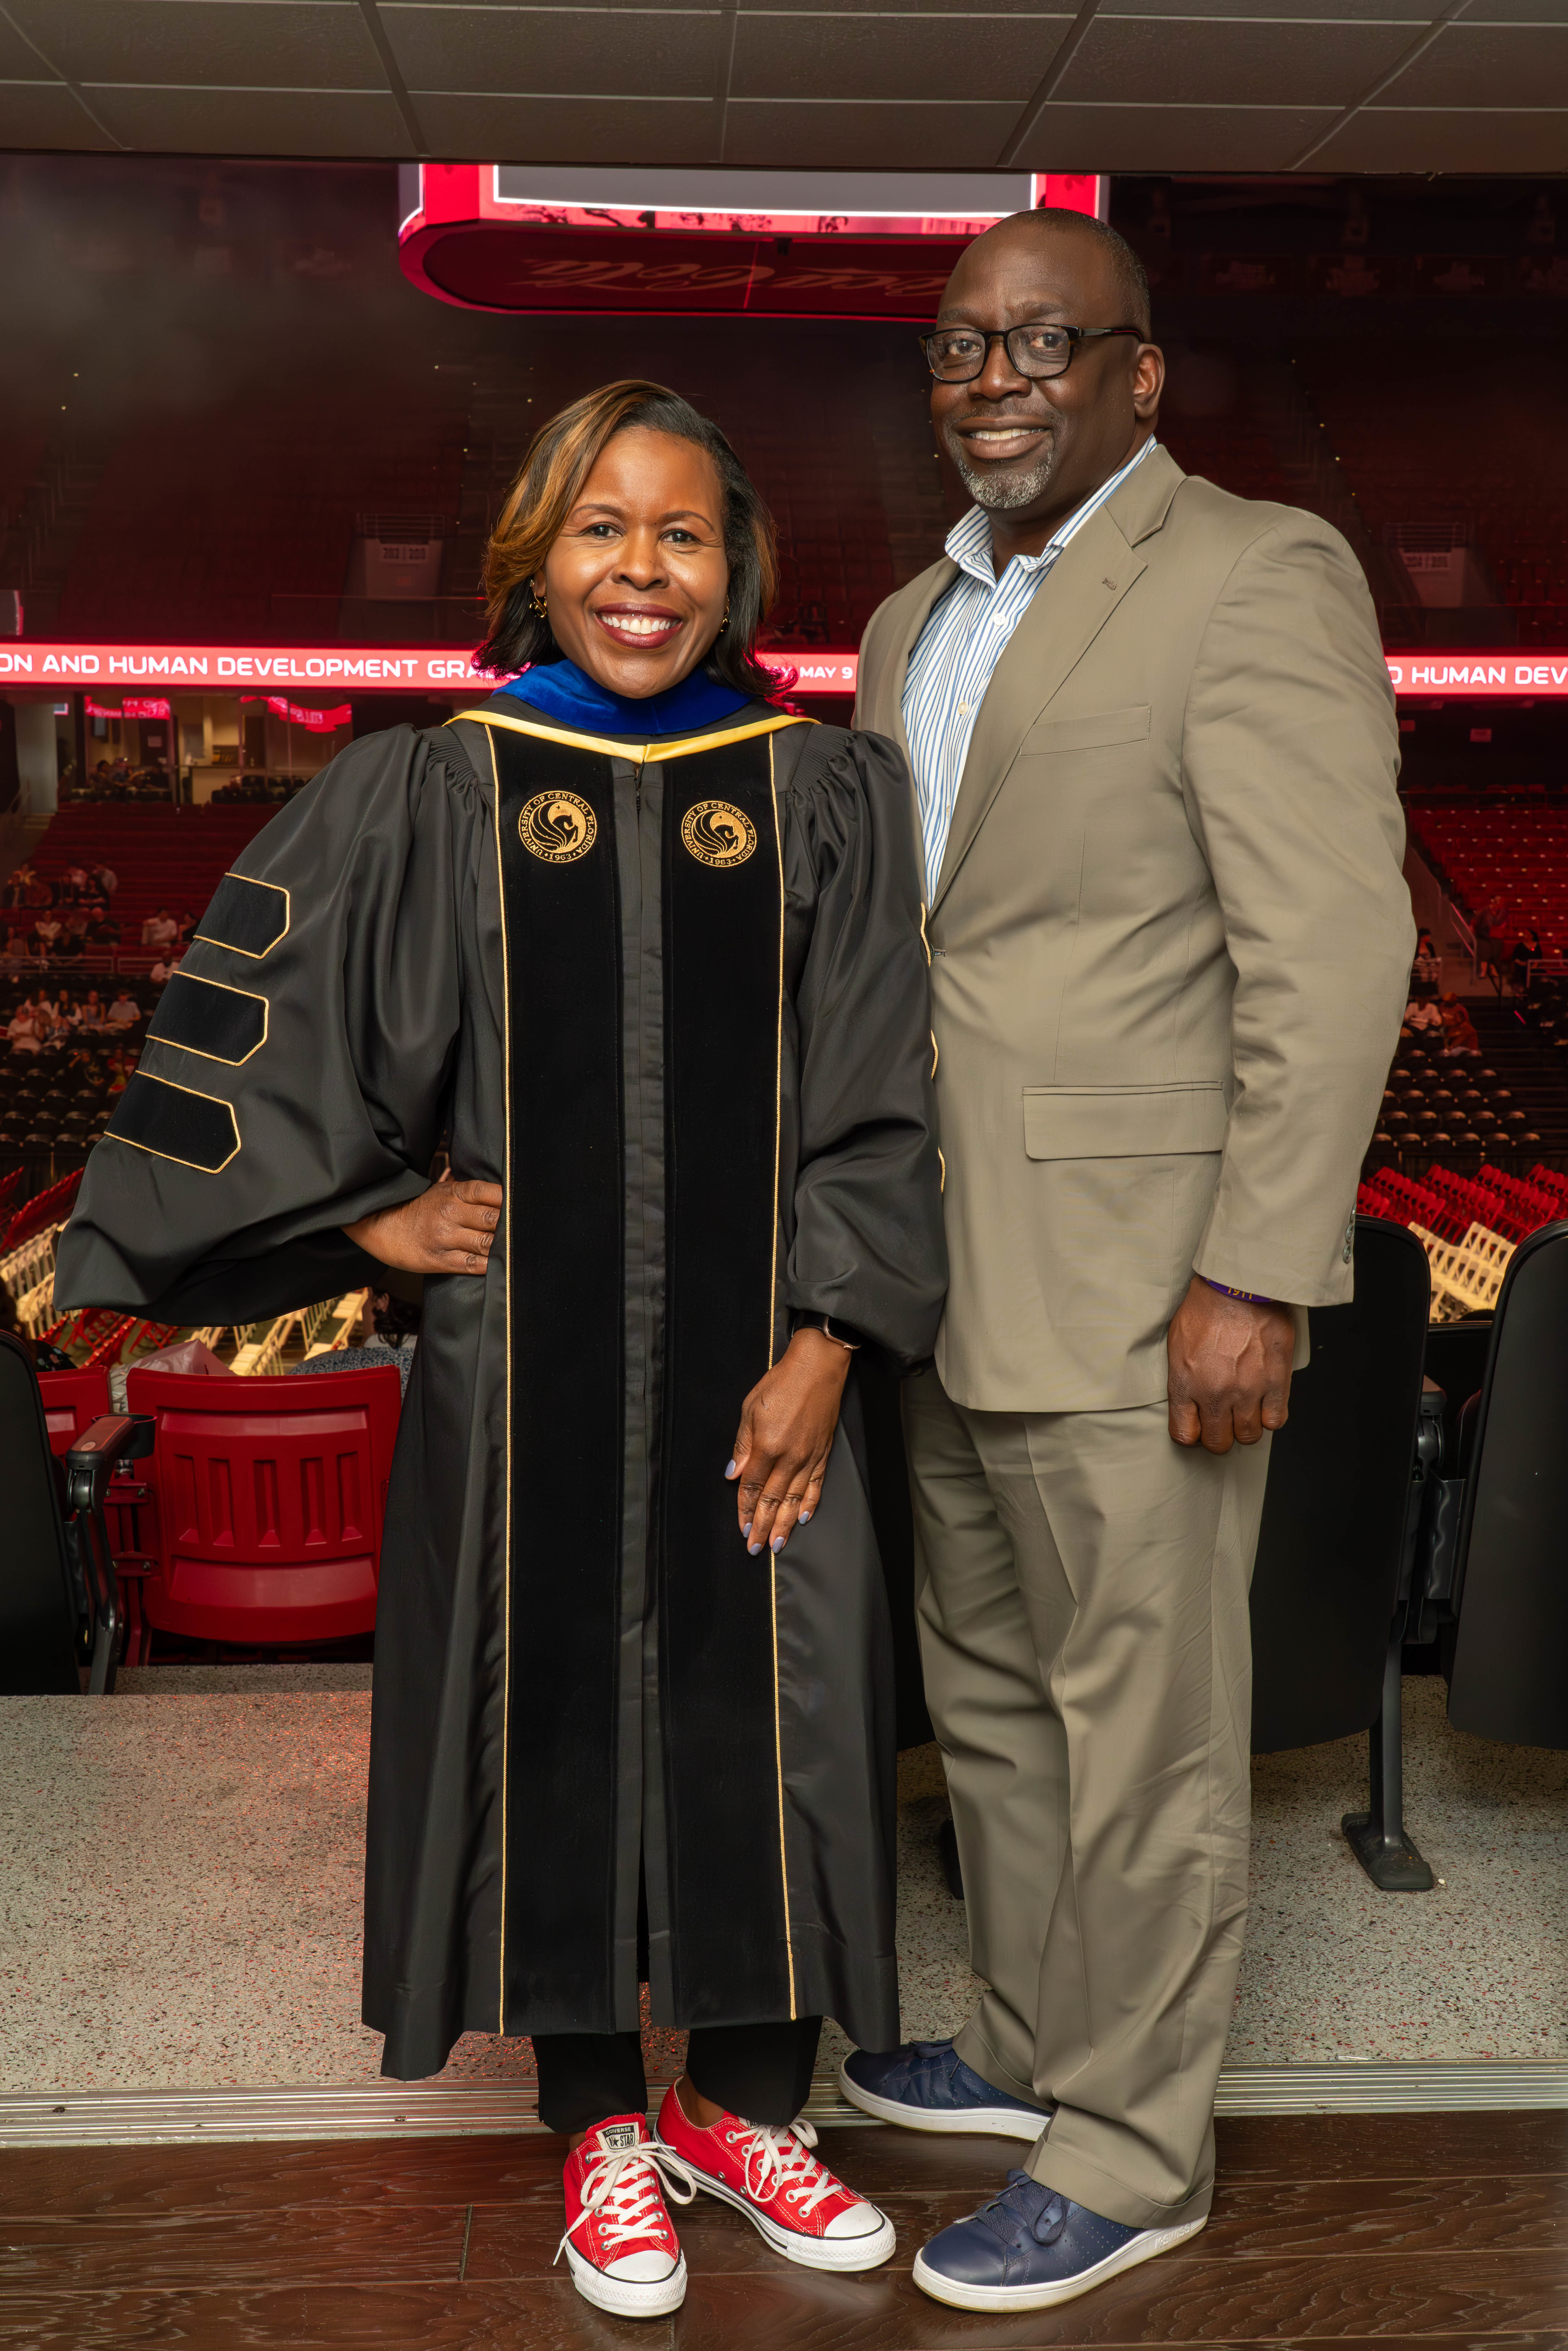 Dean Shealey poses with special guest on stage at graduation